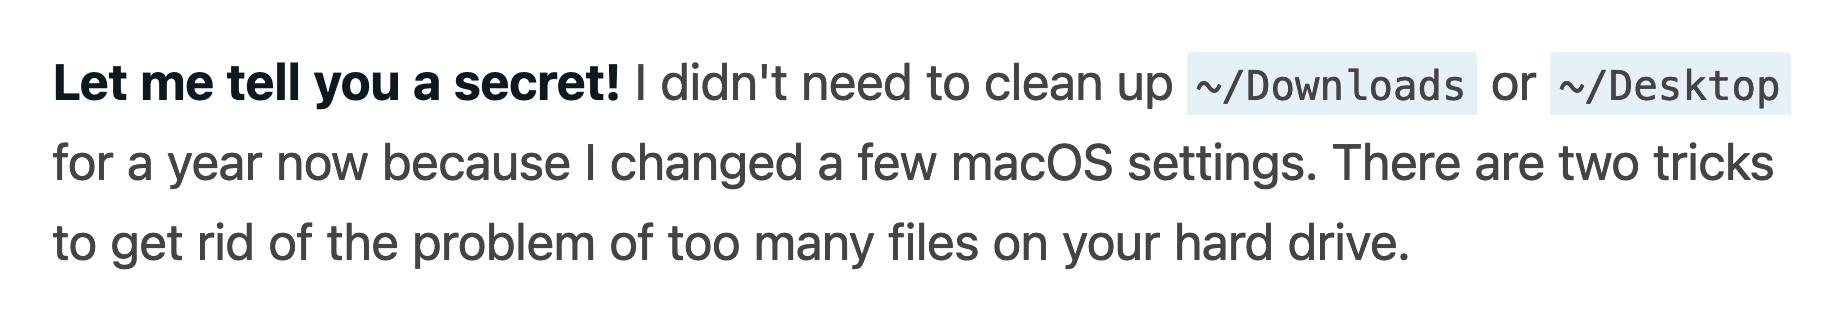 Let me tell you a secret! I didn't need to clean up ~/Downloads or ~/Desktop for a year now because I changed a few macOS settings. There are two tricks to get rid of the problem of too many files on your hard drive.